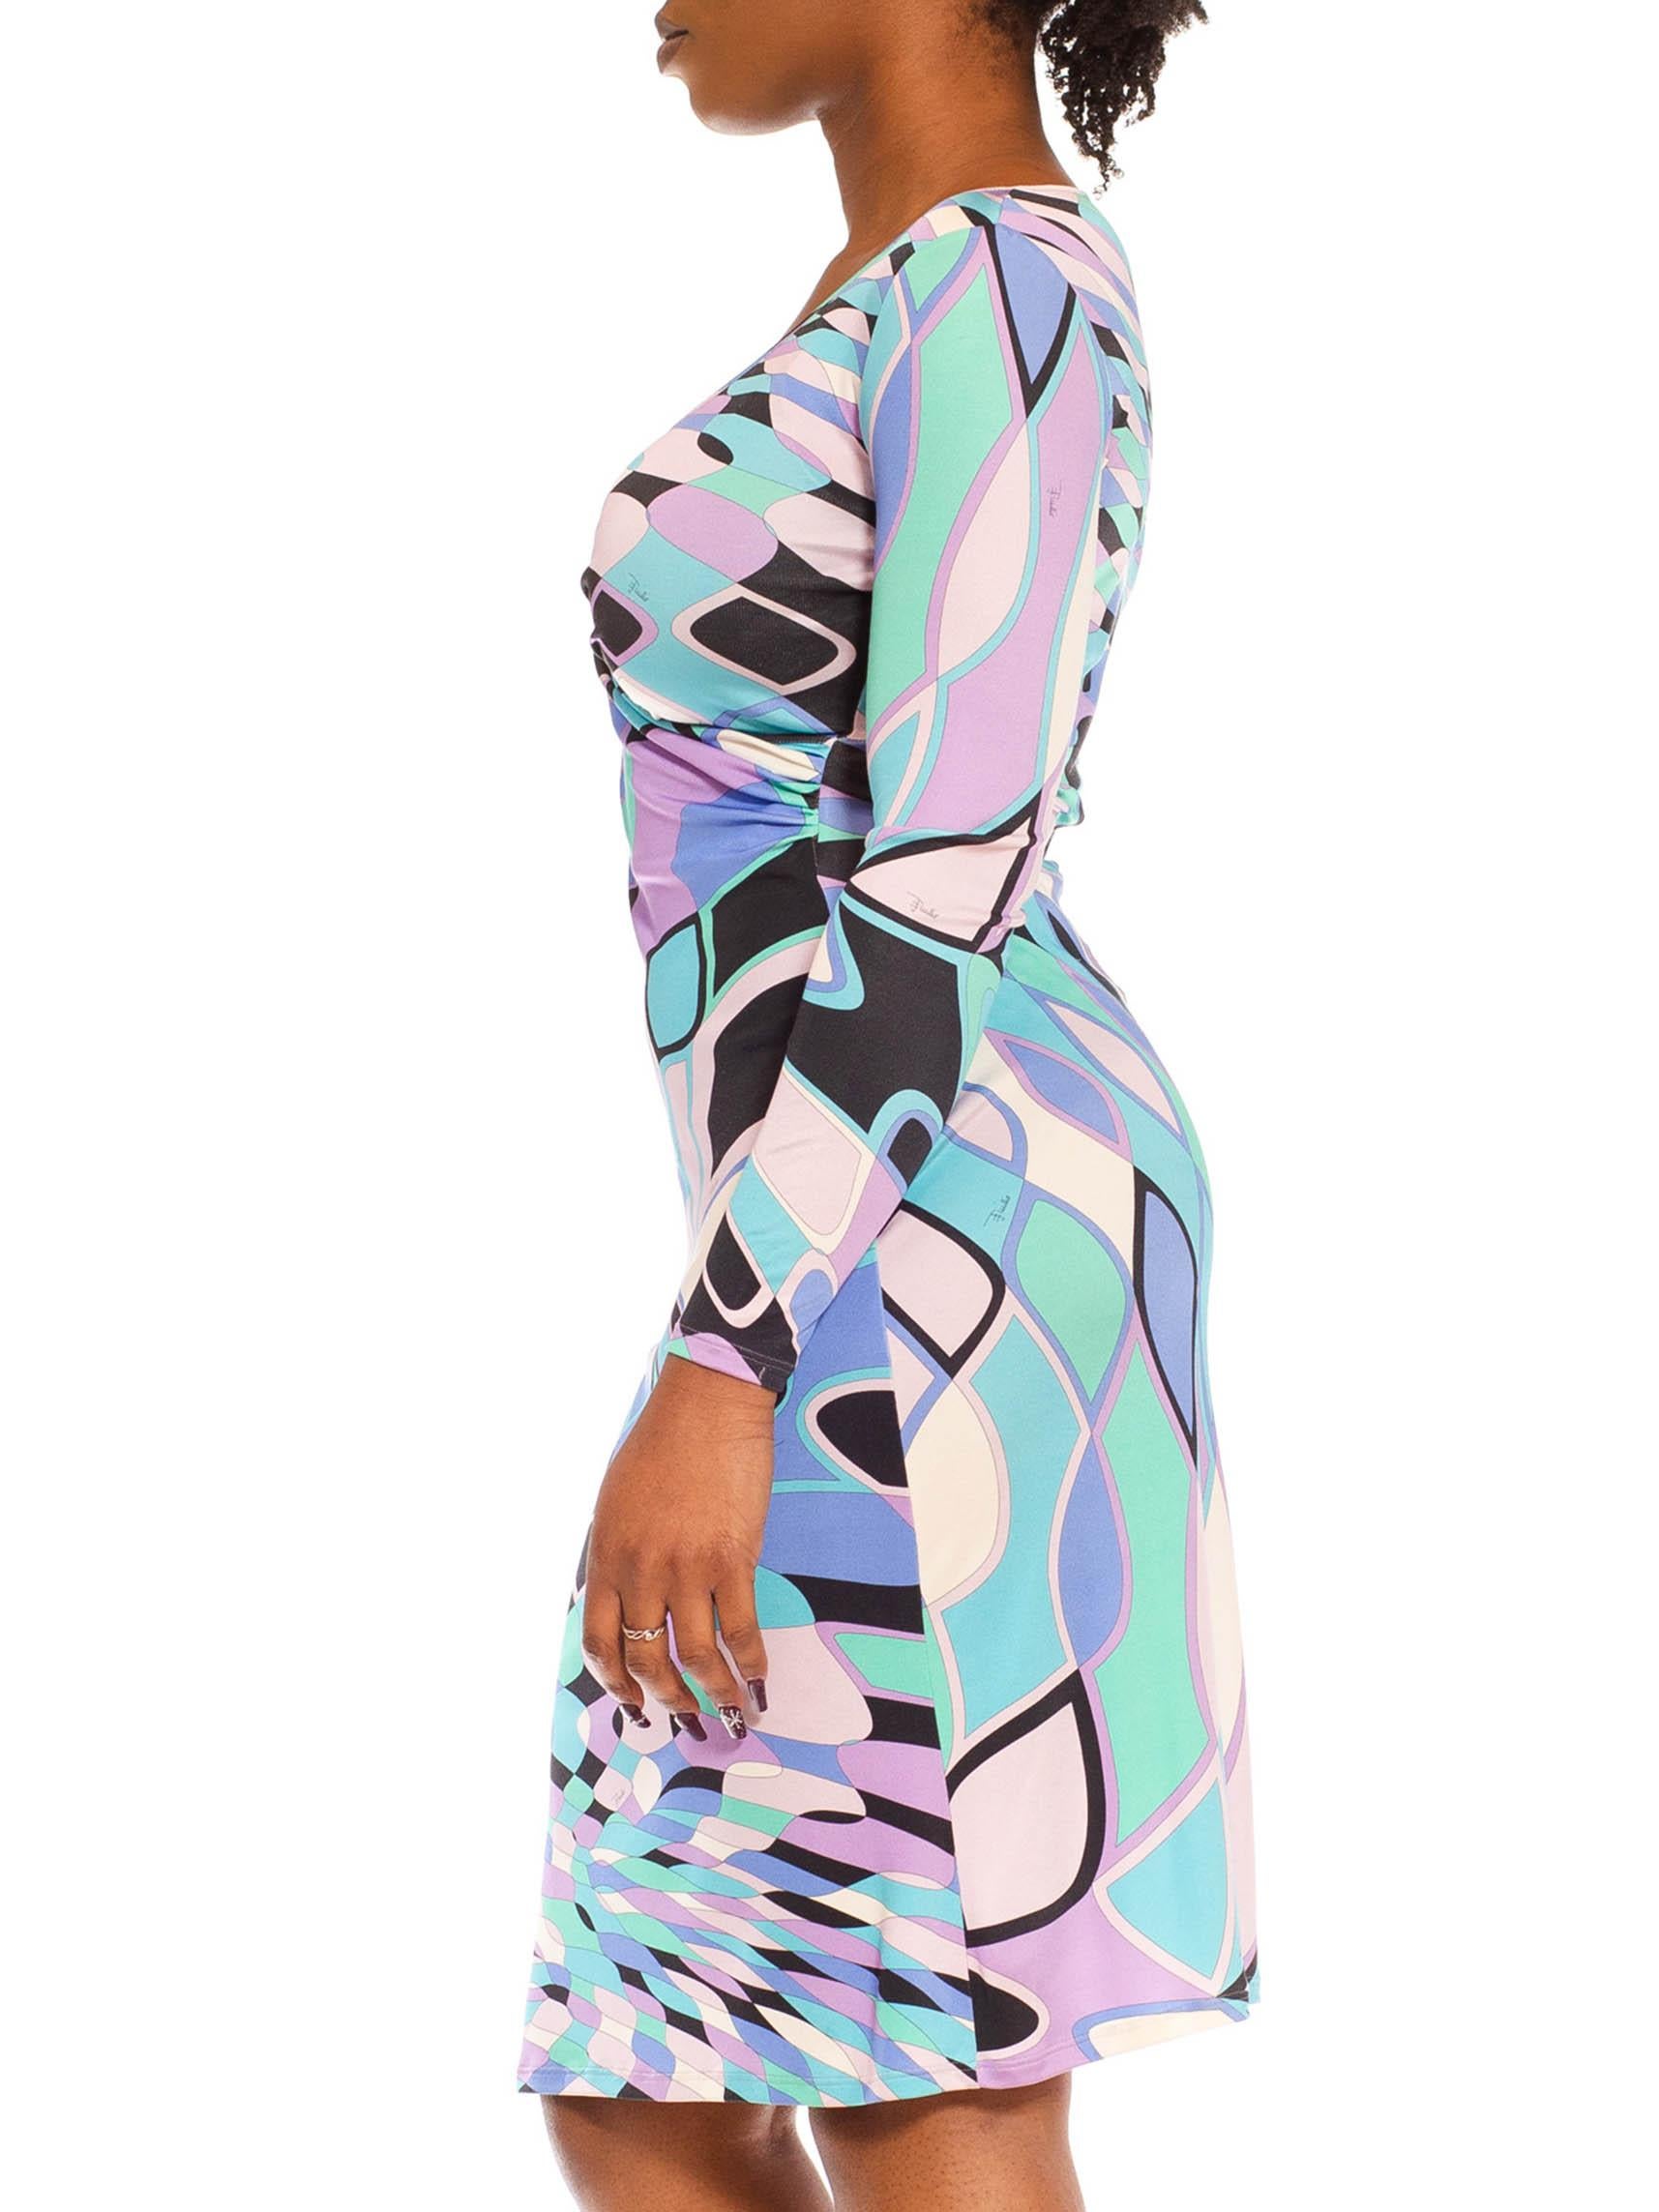 Gray 2000S Emilio Pucci Blue & Pink Psychedelic Silk Jersey Long Sleeved Dress For Sale